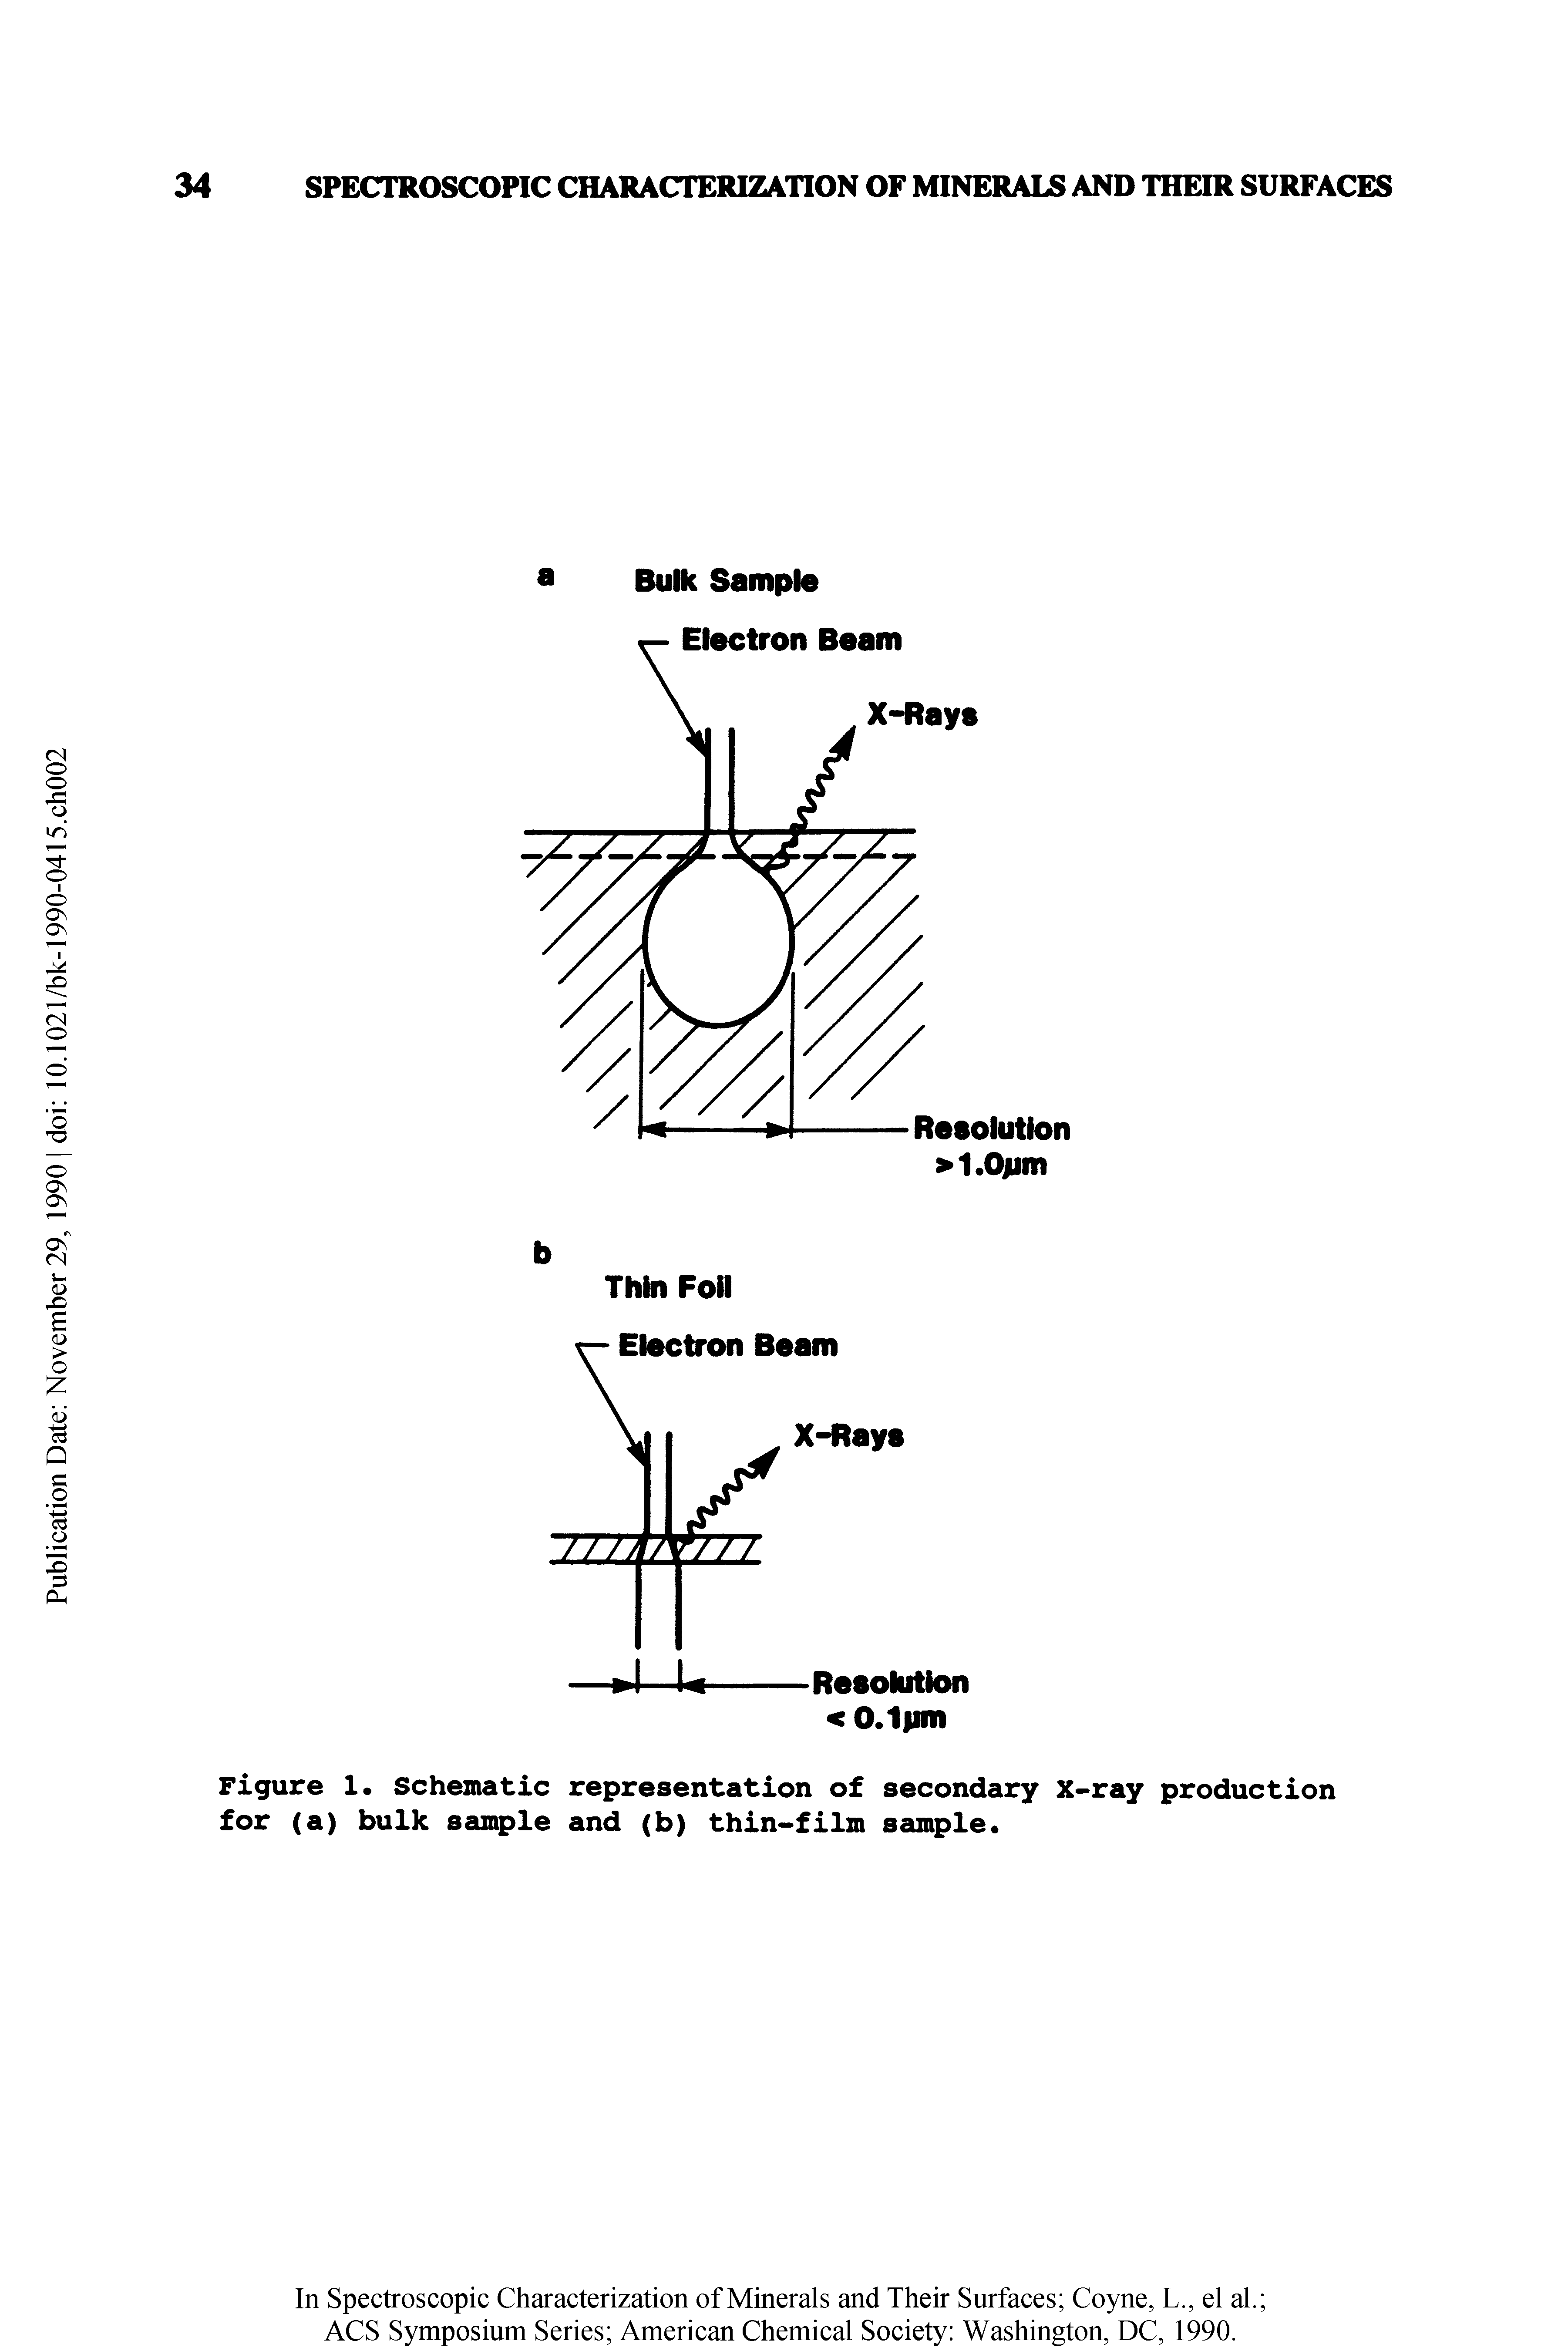 Figure 1. Schematic representation of secondary x-ray production for (a) bulk sample and (b) thin-film sample.